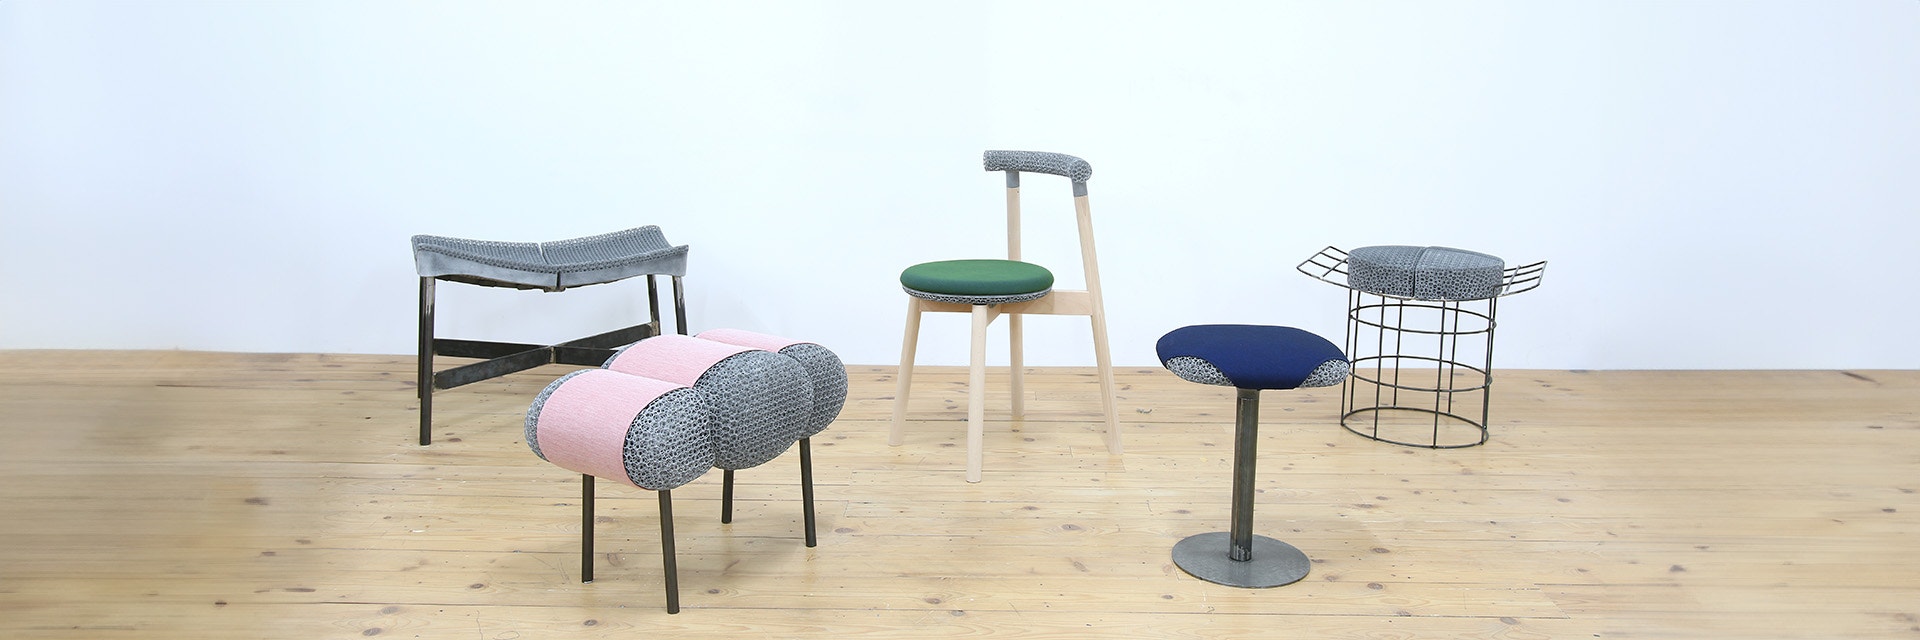 A variety of different pieces of furniture with 3D-printed lattice designs